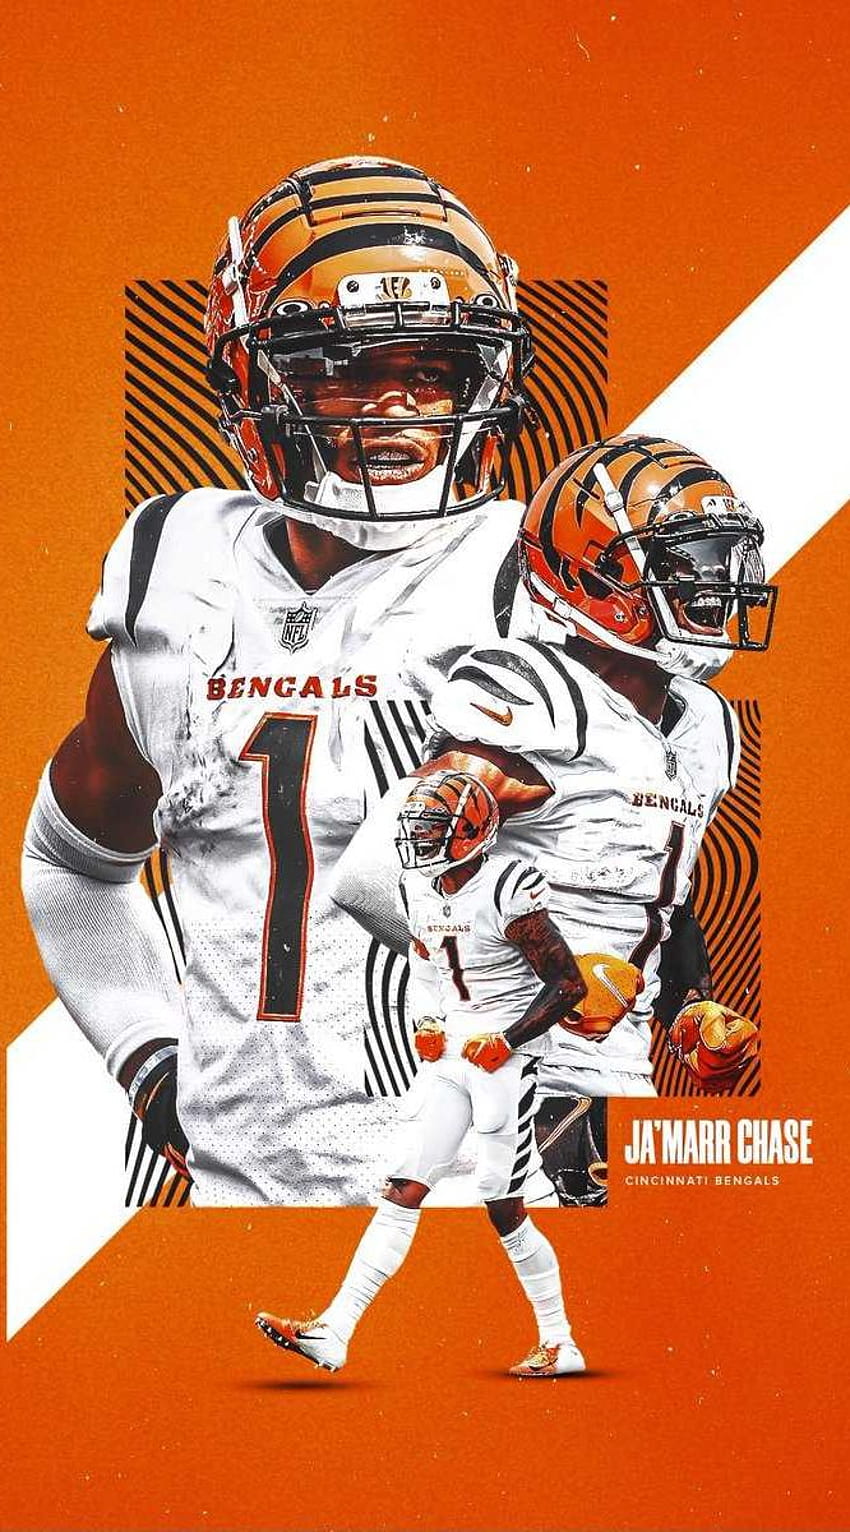 Iphone JaMarr Chase jamarr chase nfl HD phone wallpaper  Pxfuel